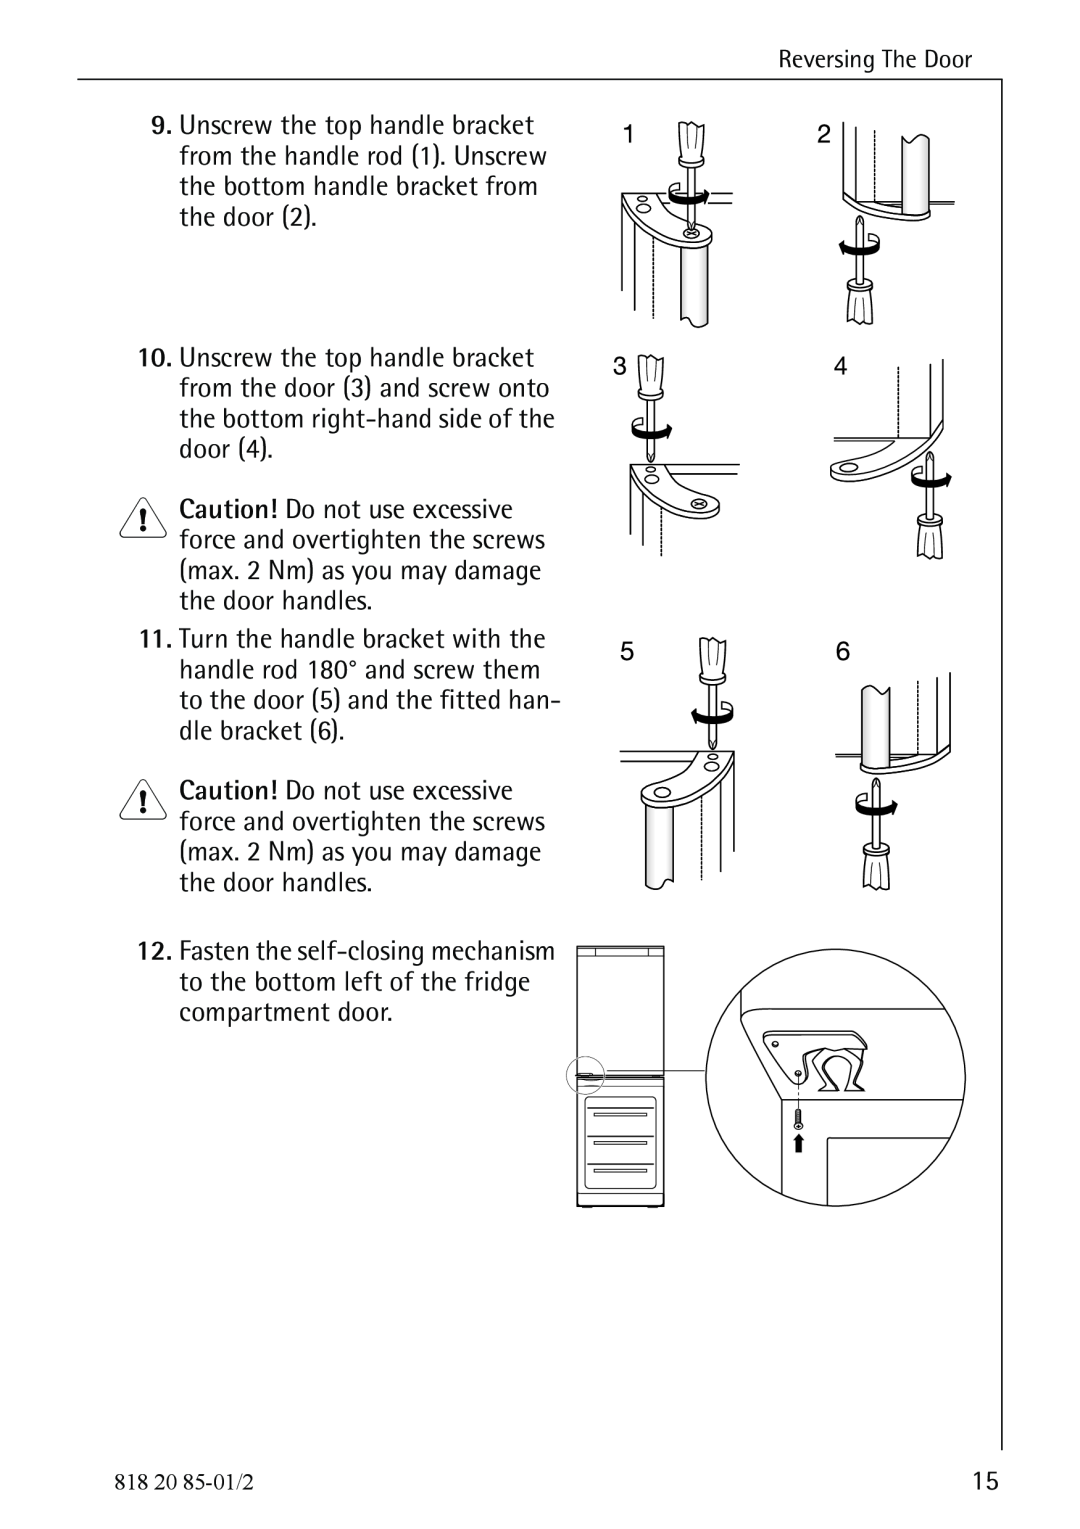 Electrolux 818 20 85 operating instructions Turn the handle bracket with the 